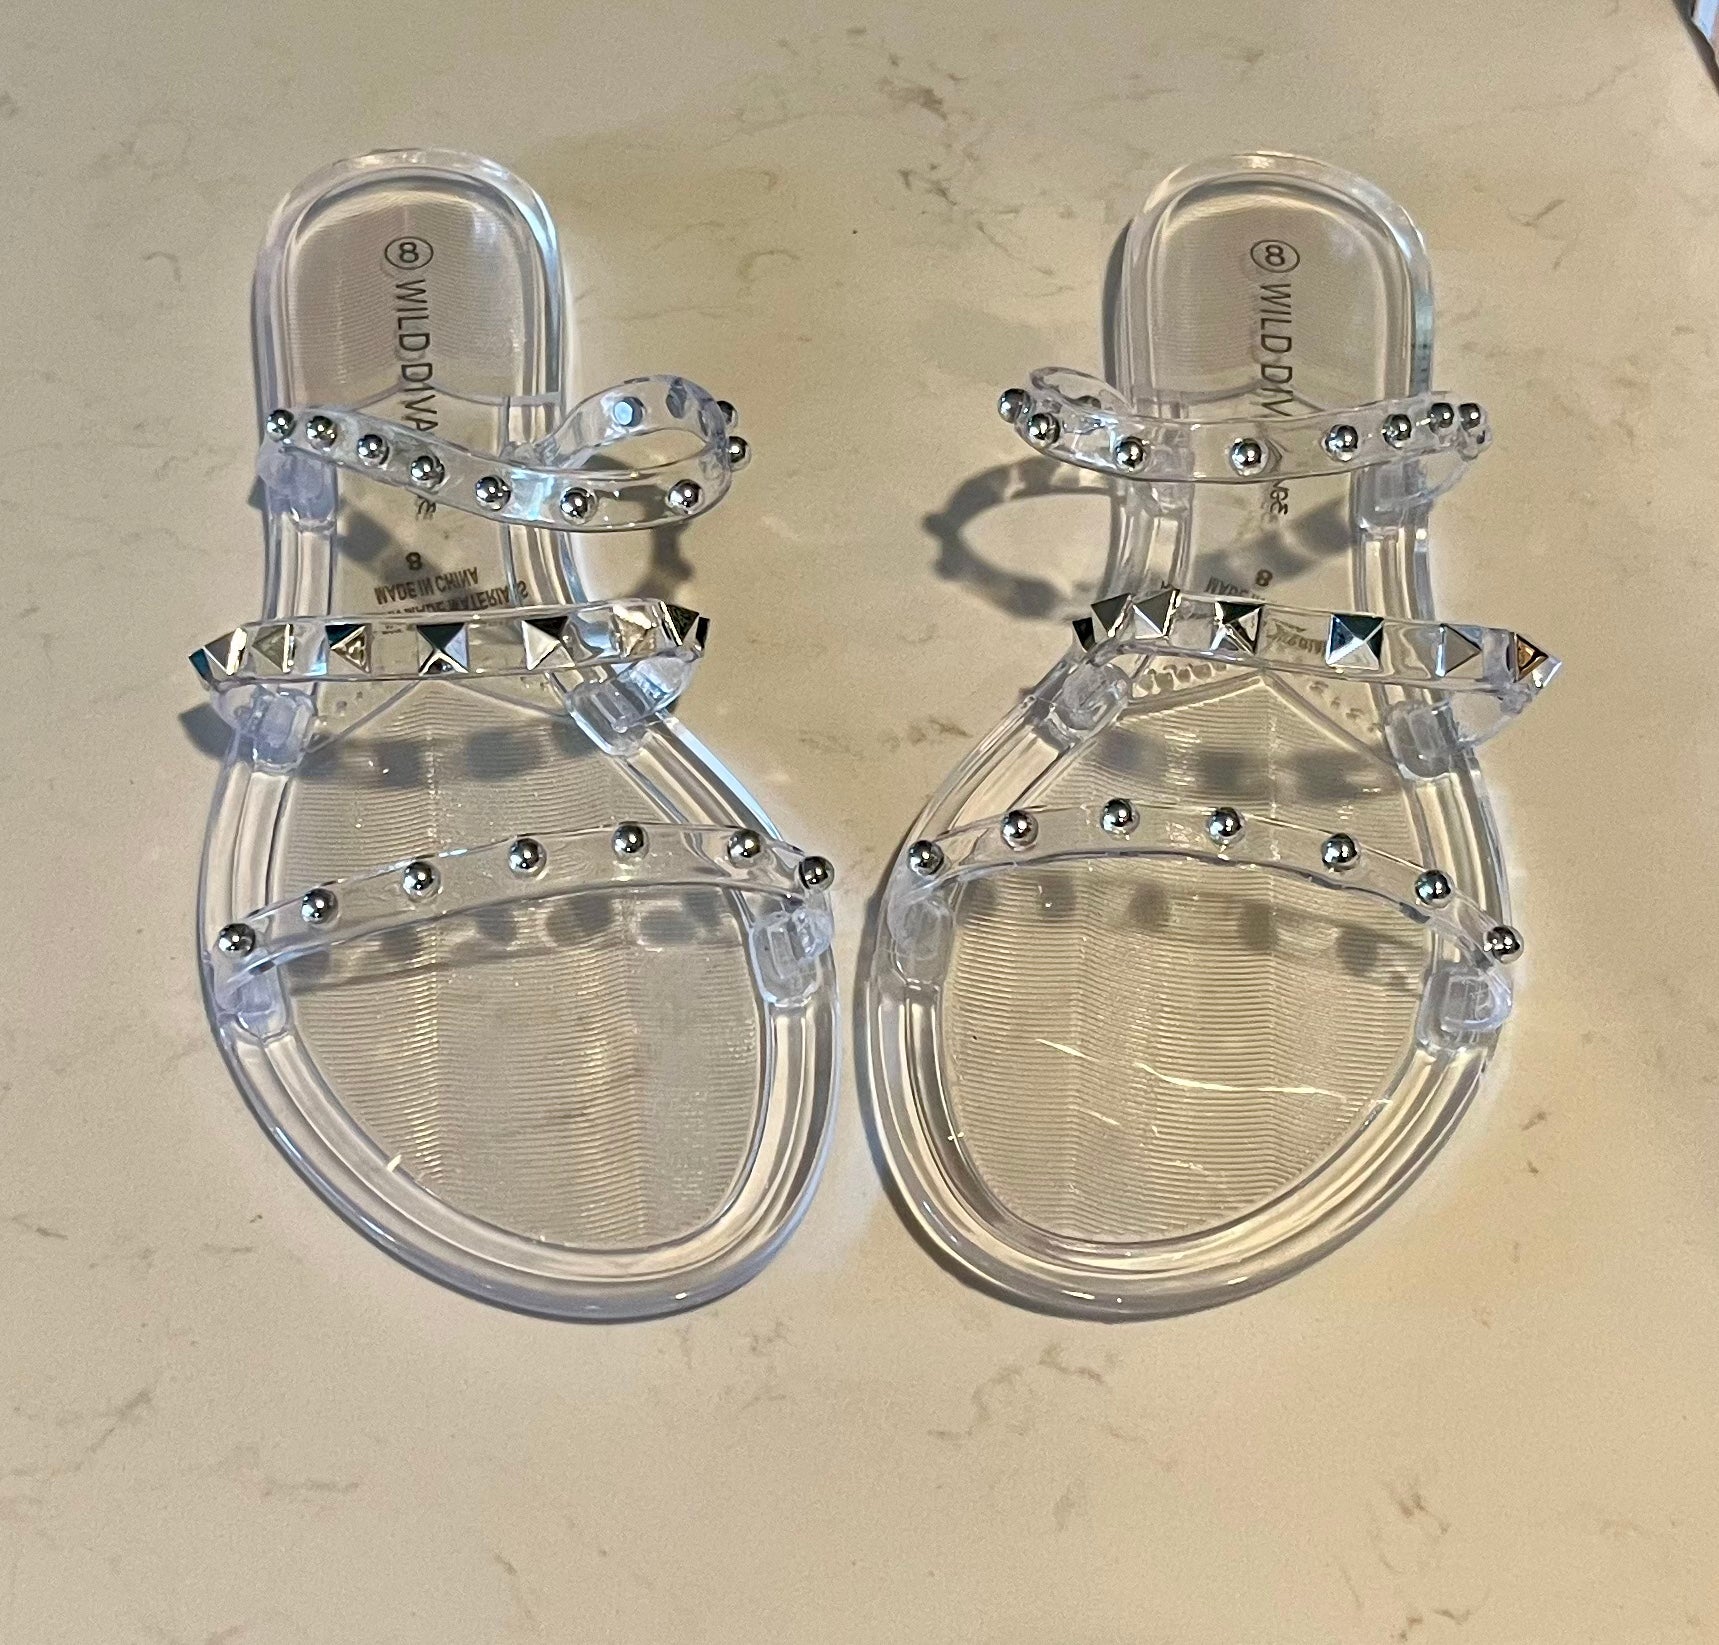 Clear studded sandals